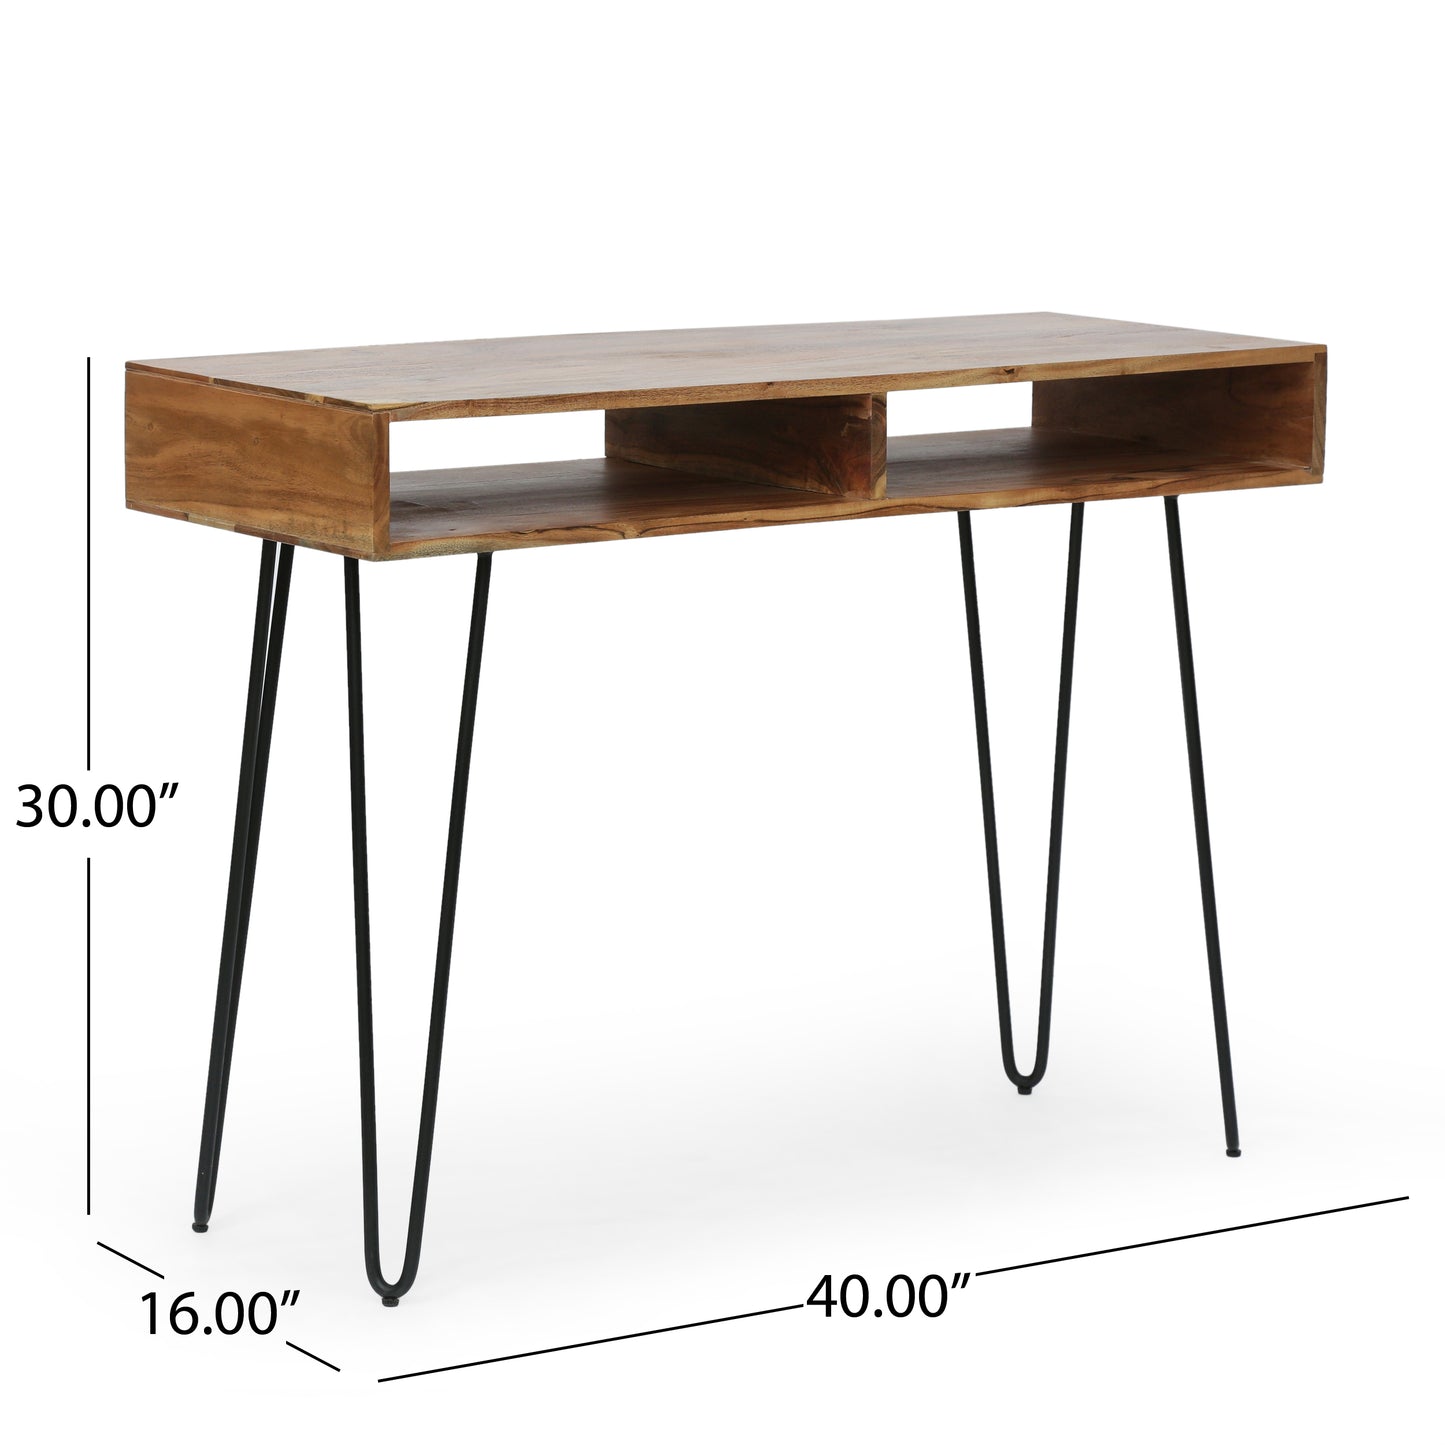 Reidsville Modern Industrial Handcrafted Acacia Wood Storage Desk with Hairpin Legs